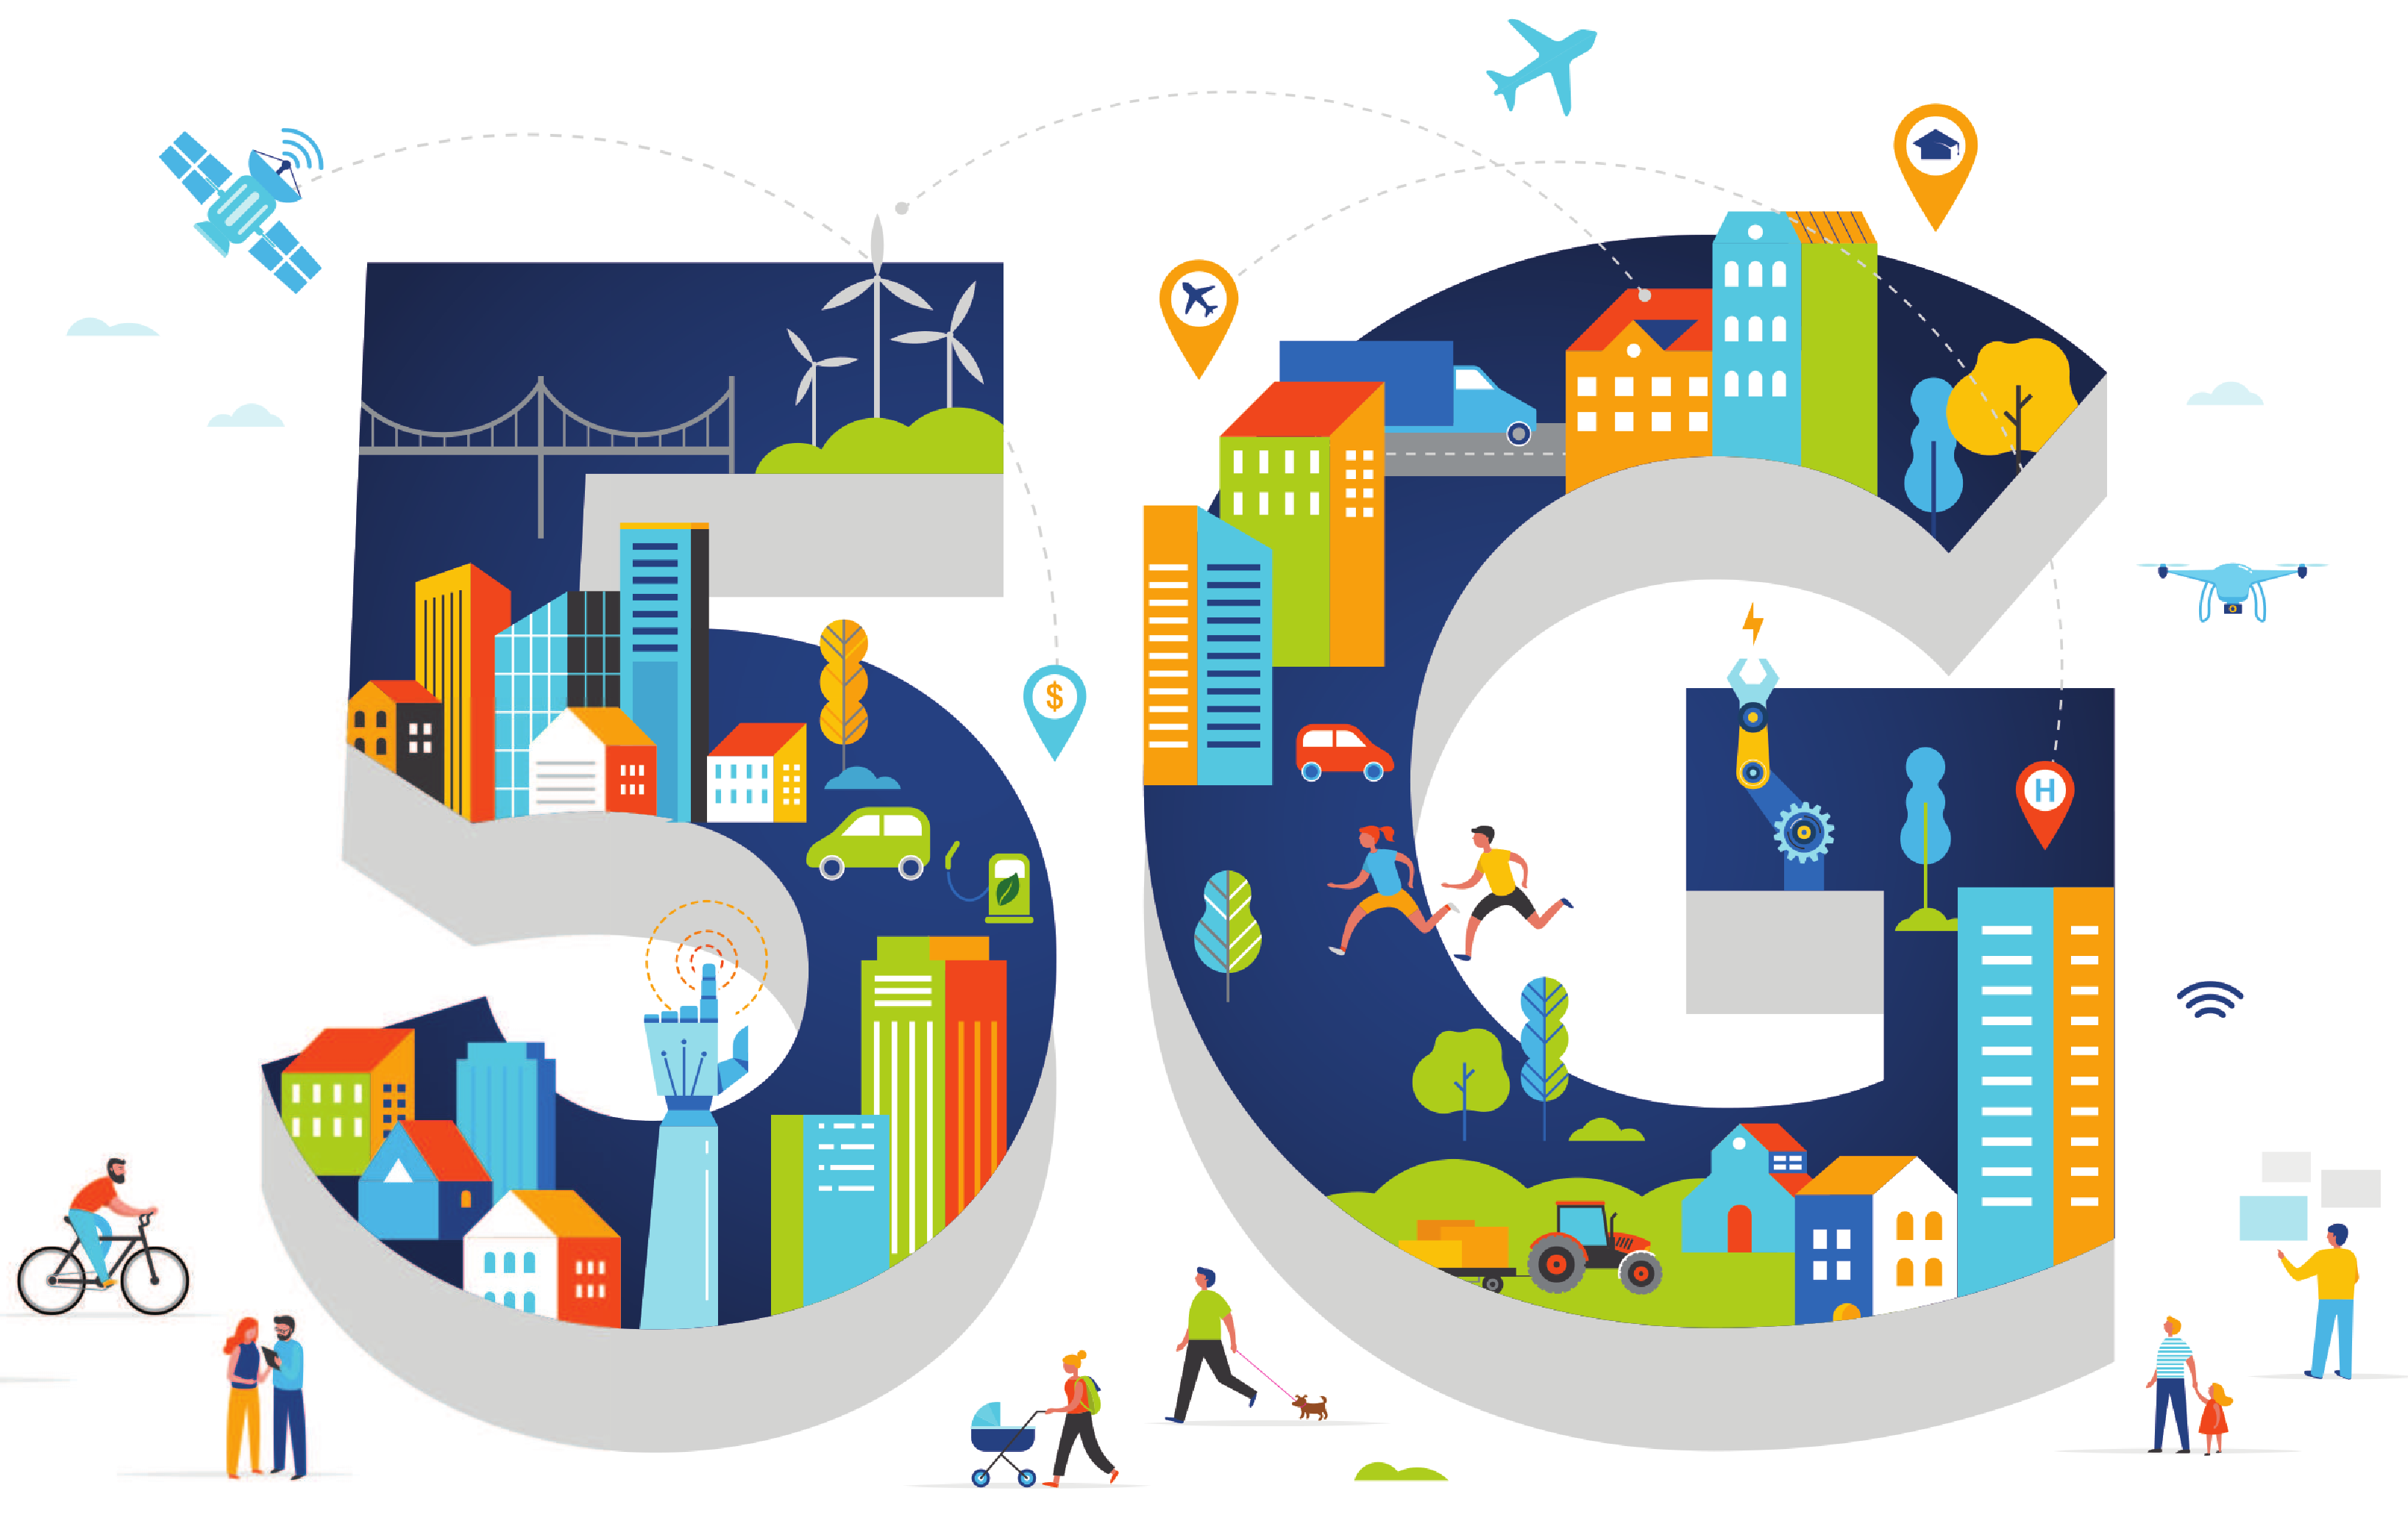 block text 5G filled in with illustrated people, buildings, transportation, landscape elements in bold color and 2D design